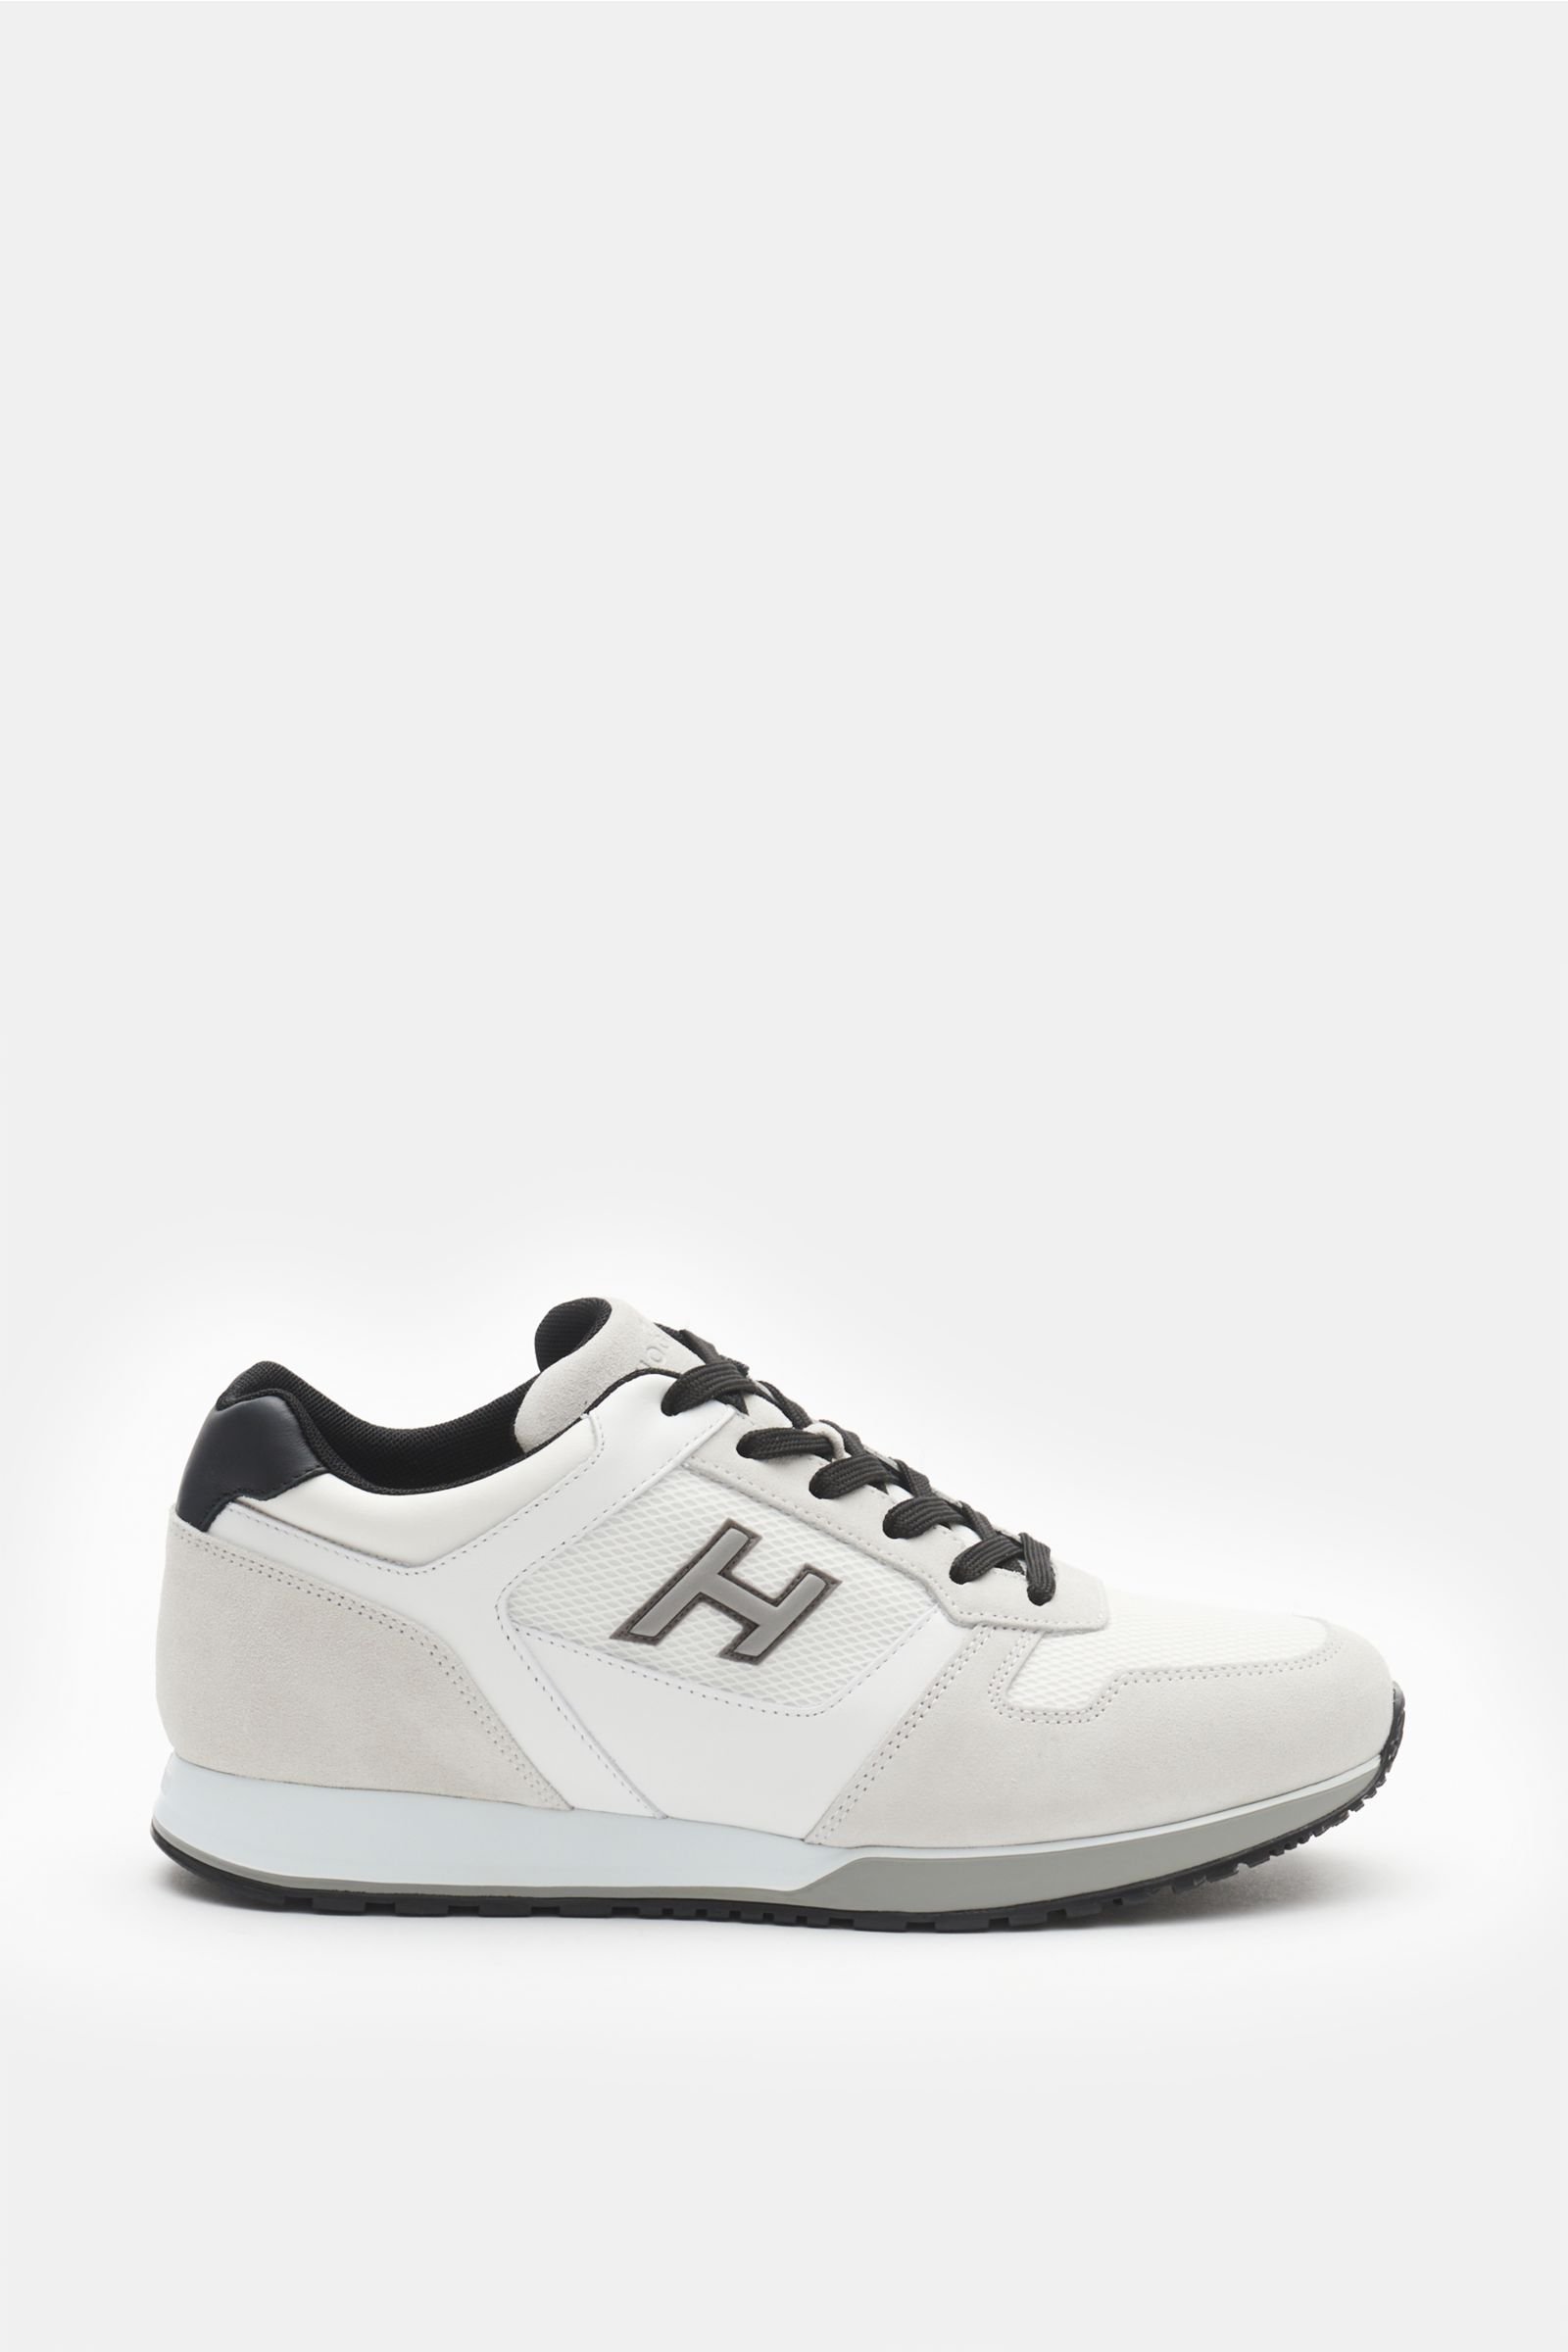 Sneakers 'H321' light grey/white